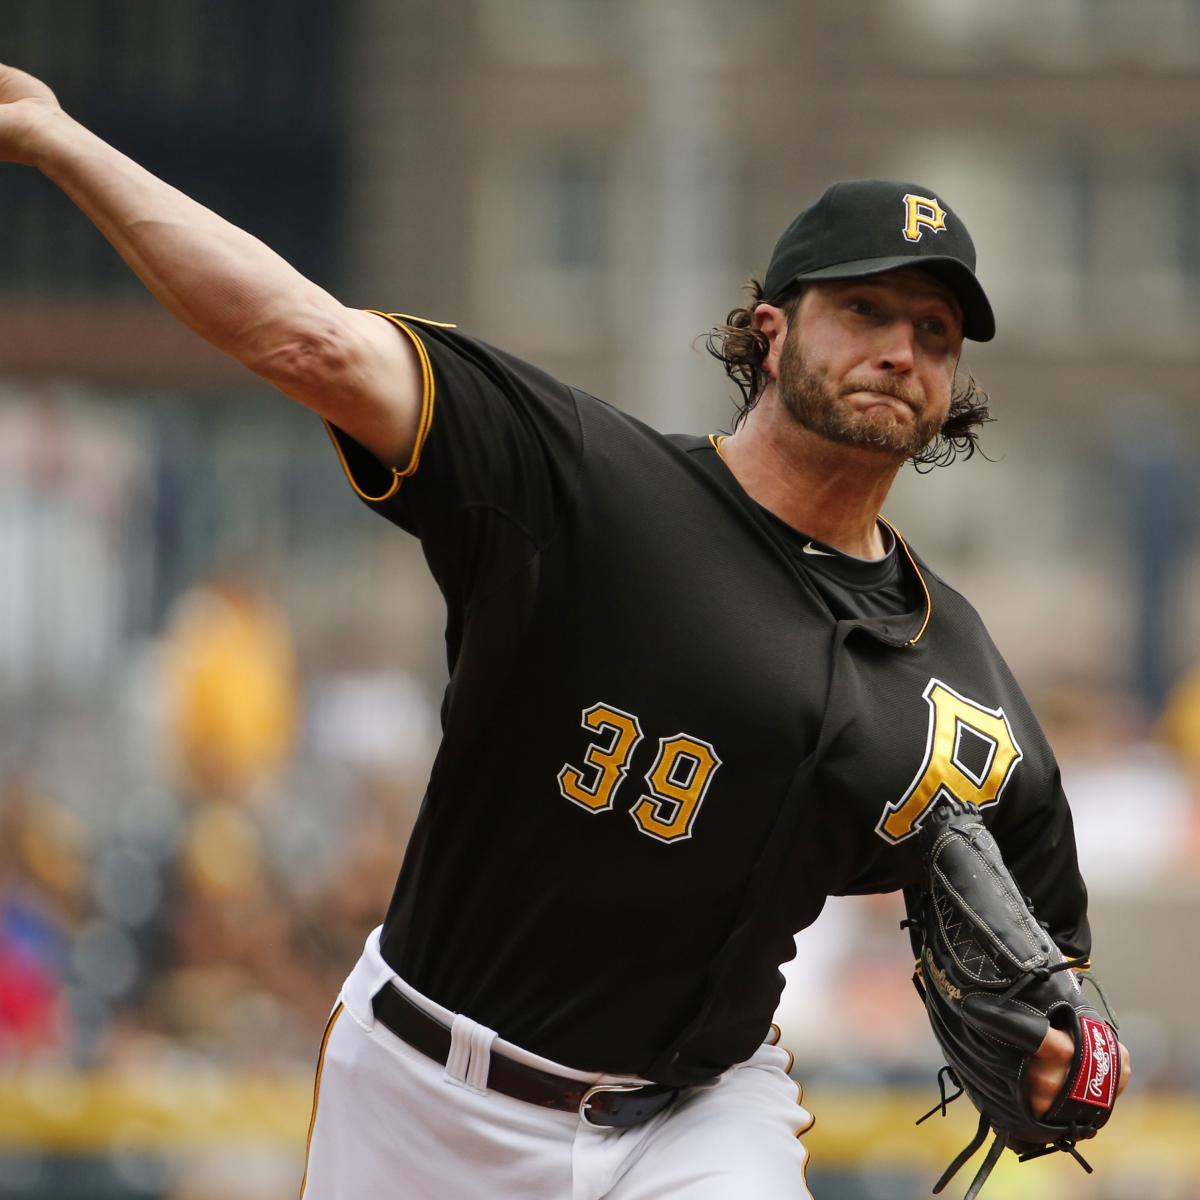 Chicago Cubs vs. Pittsburgh Pirates preview, Friday 6/16, 6:05 CT